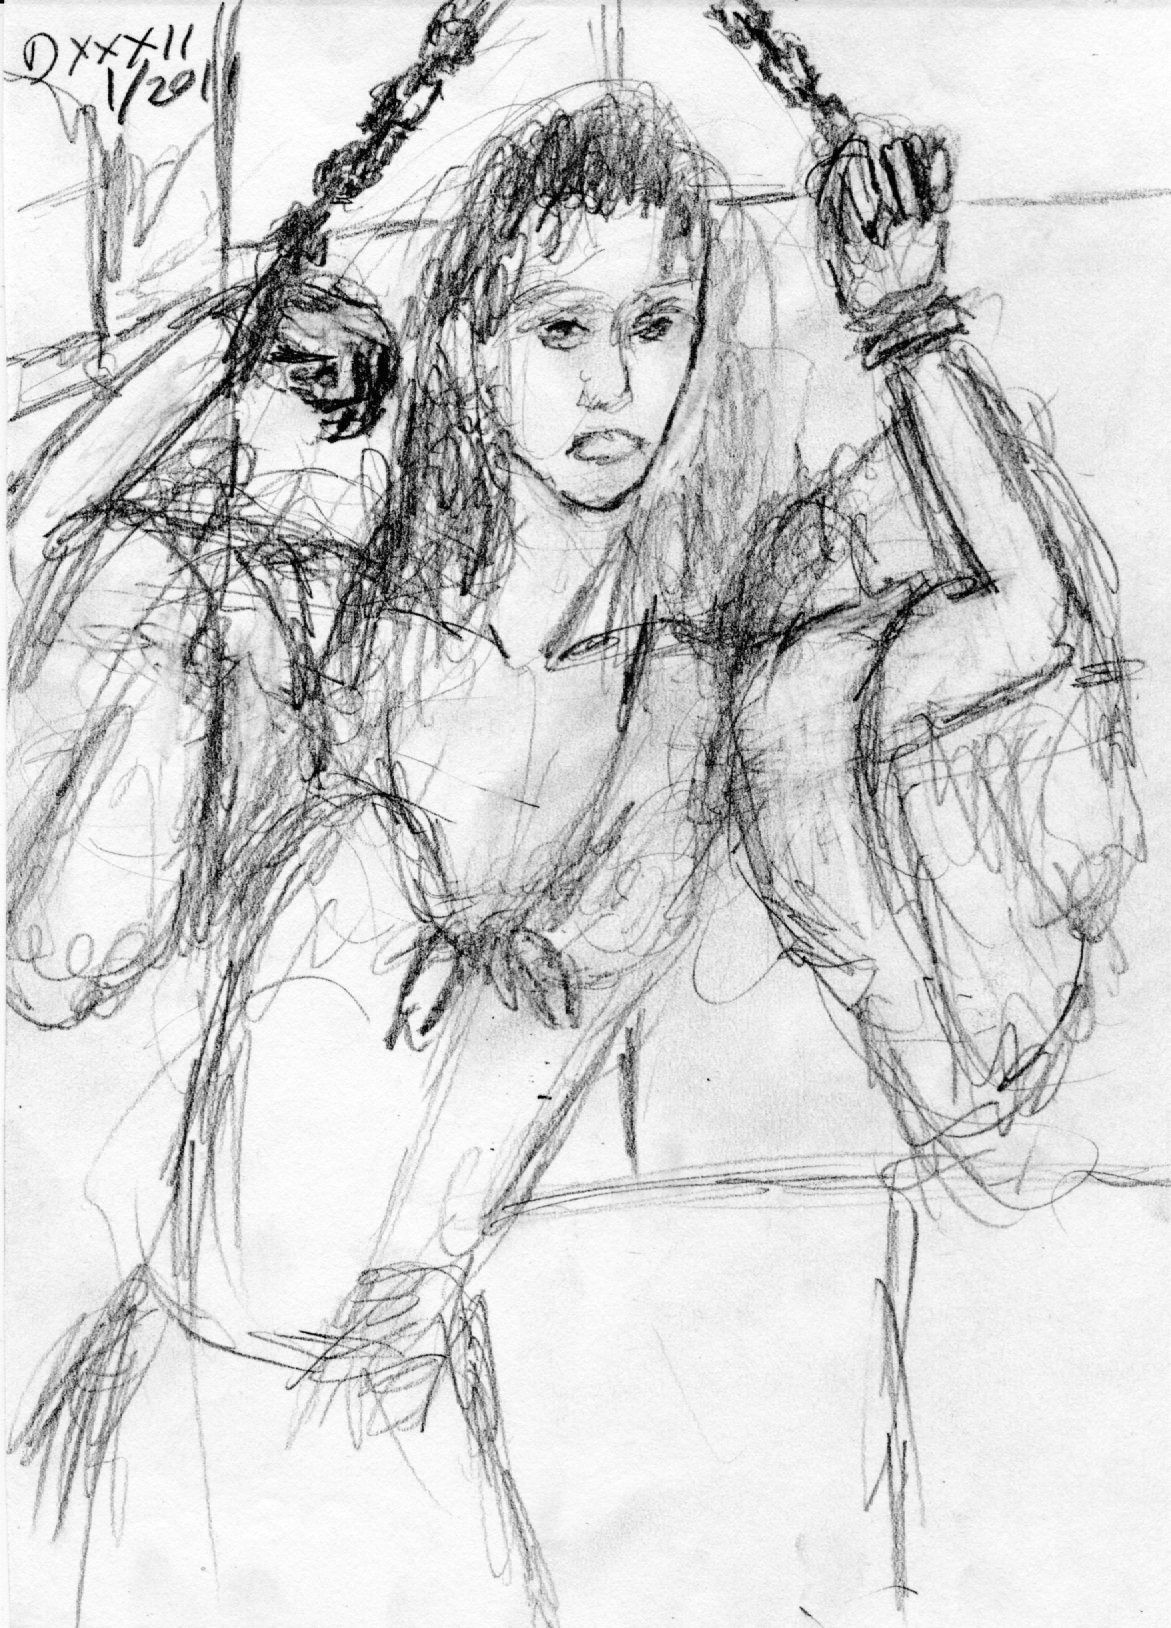 Drawing Of Chained Hands A Scene From A Three Musketeers Movie where the Lady is Chained to